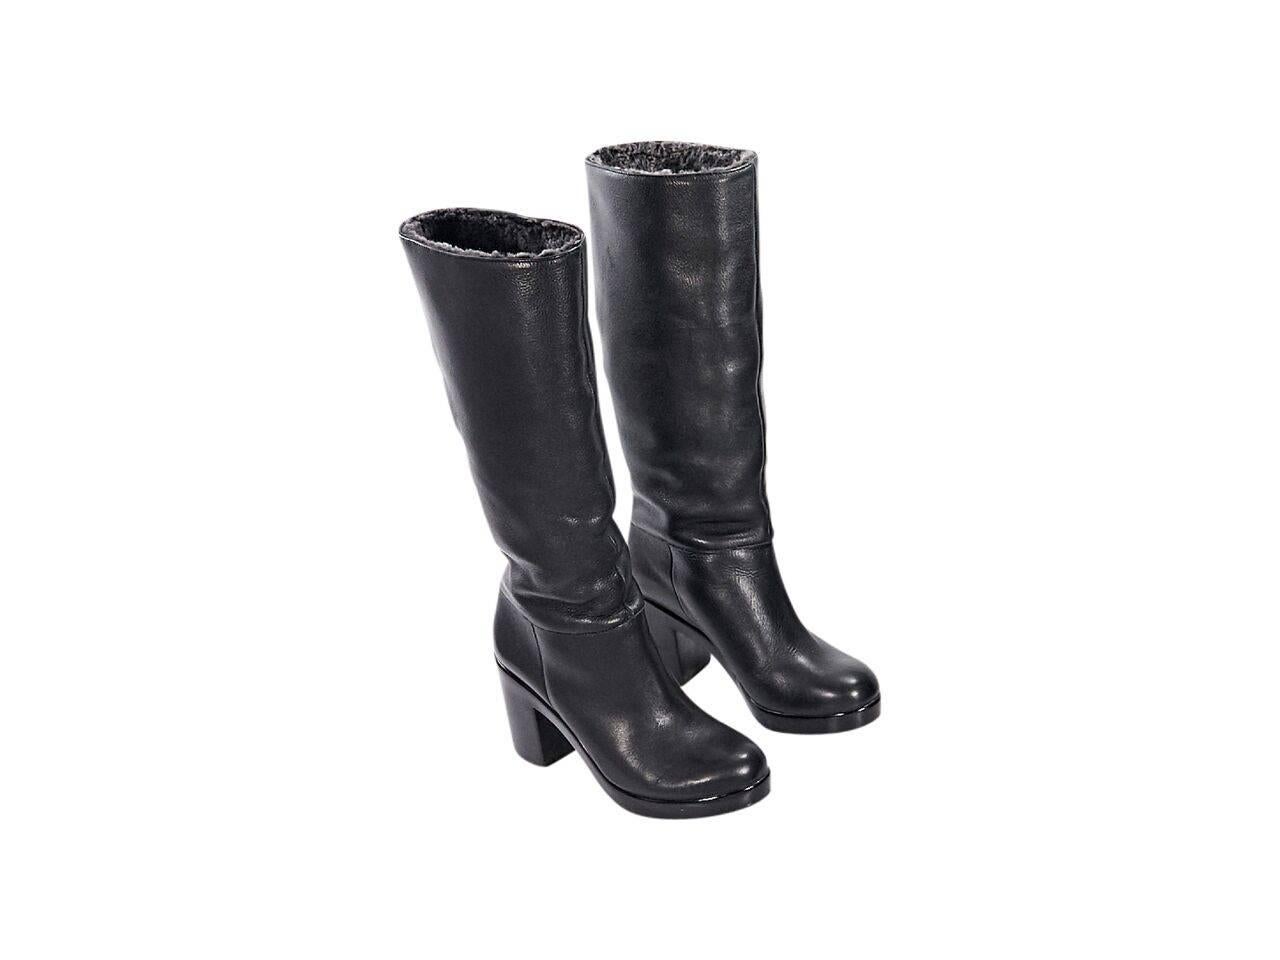 Product details:  Black leather tall boots by Robert Clergerie.  Round toe.  Chunky block heel and platform.  Fuzzy lining.  Pull-on style.  
Condition: Pre-owned. Very good.
Est. Retail $ 995.00